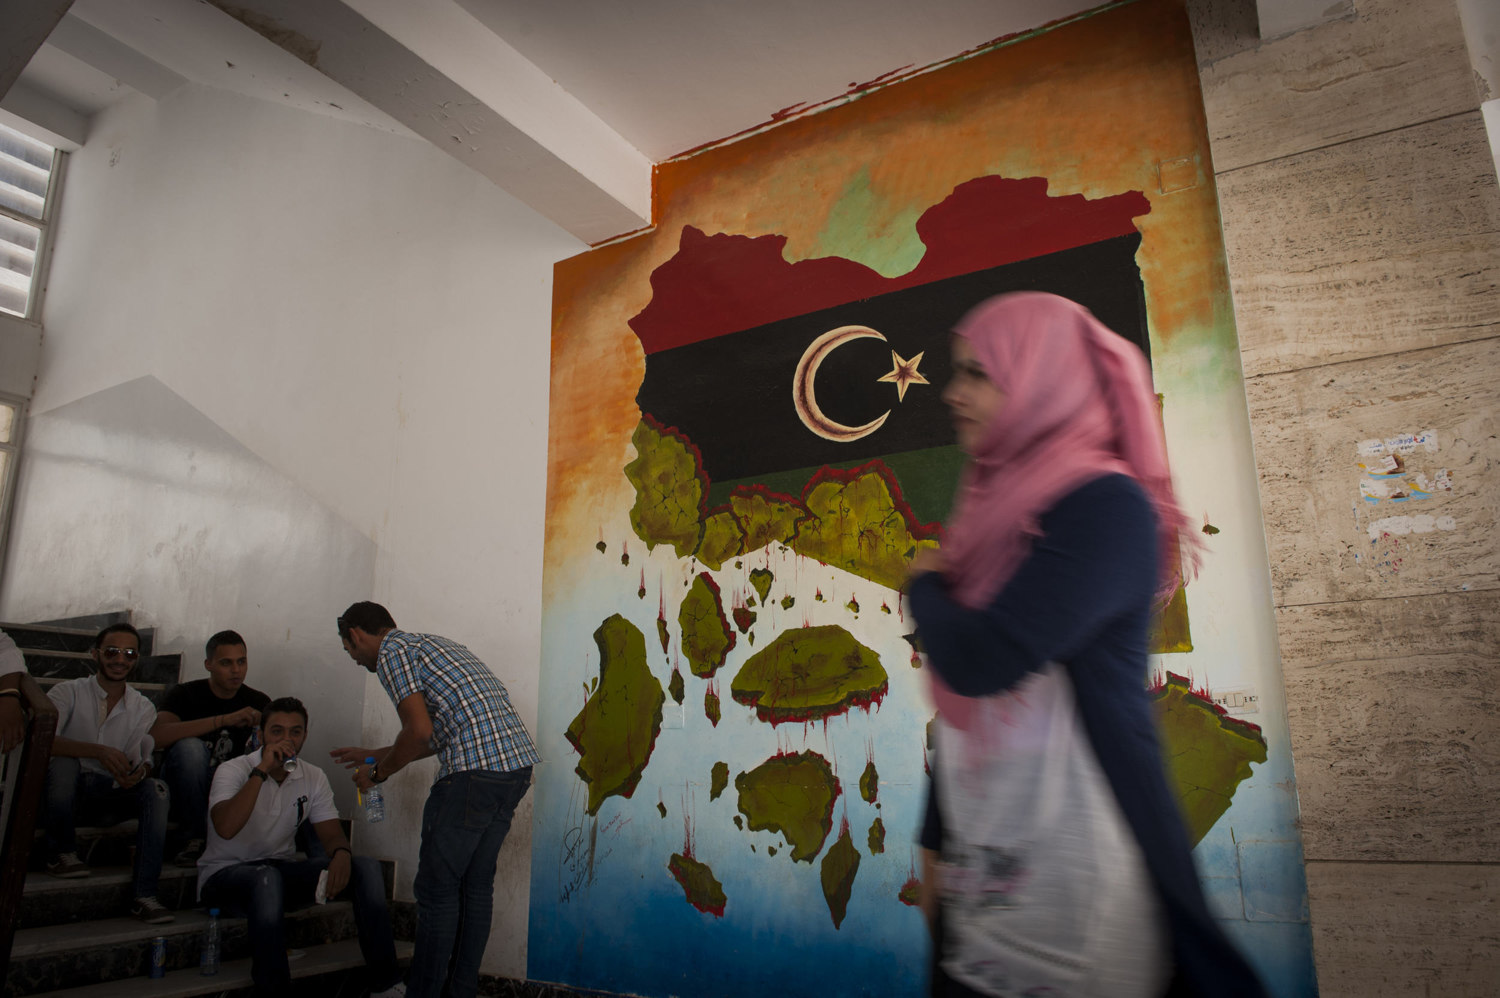  Students at Tripoli University, in front of a mural painted by Bilal and Nazih on July 12th 2012.

 